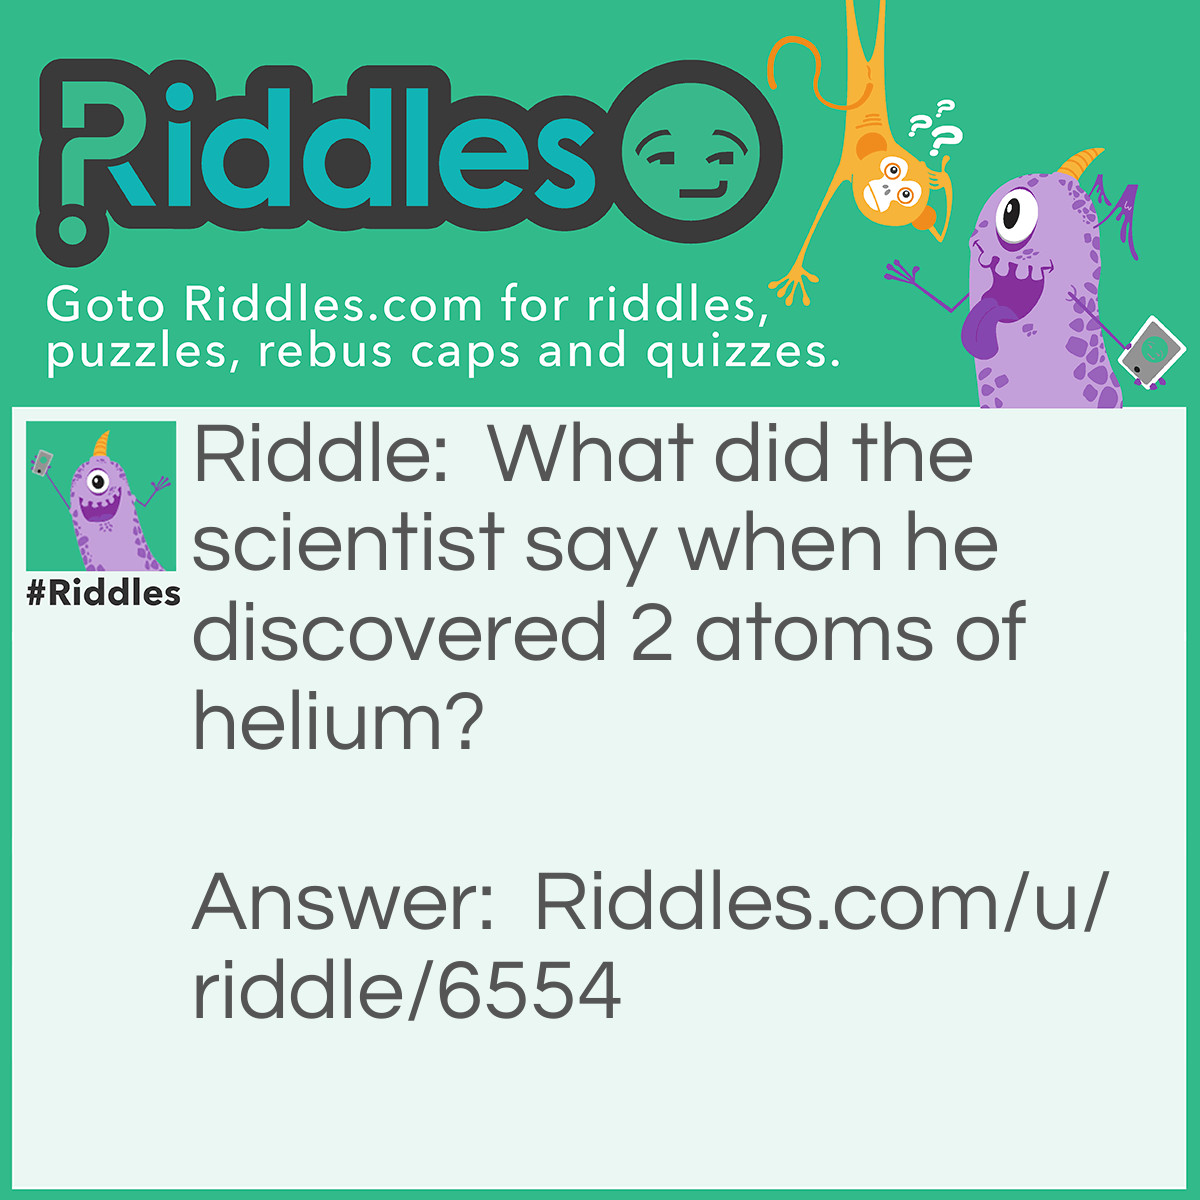 Riddle: What did the scientist say when he discovered 2 atoms of helium? Answer: He he!